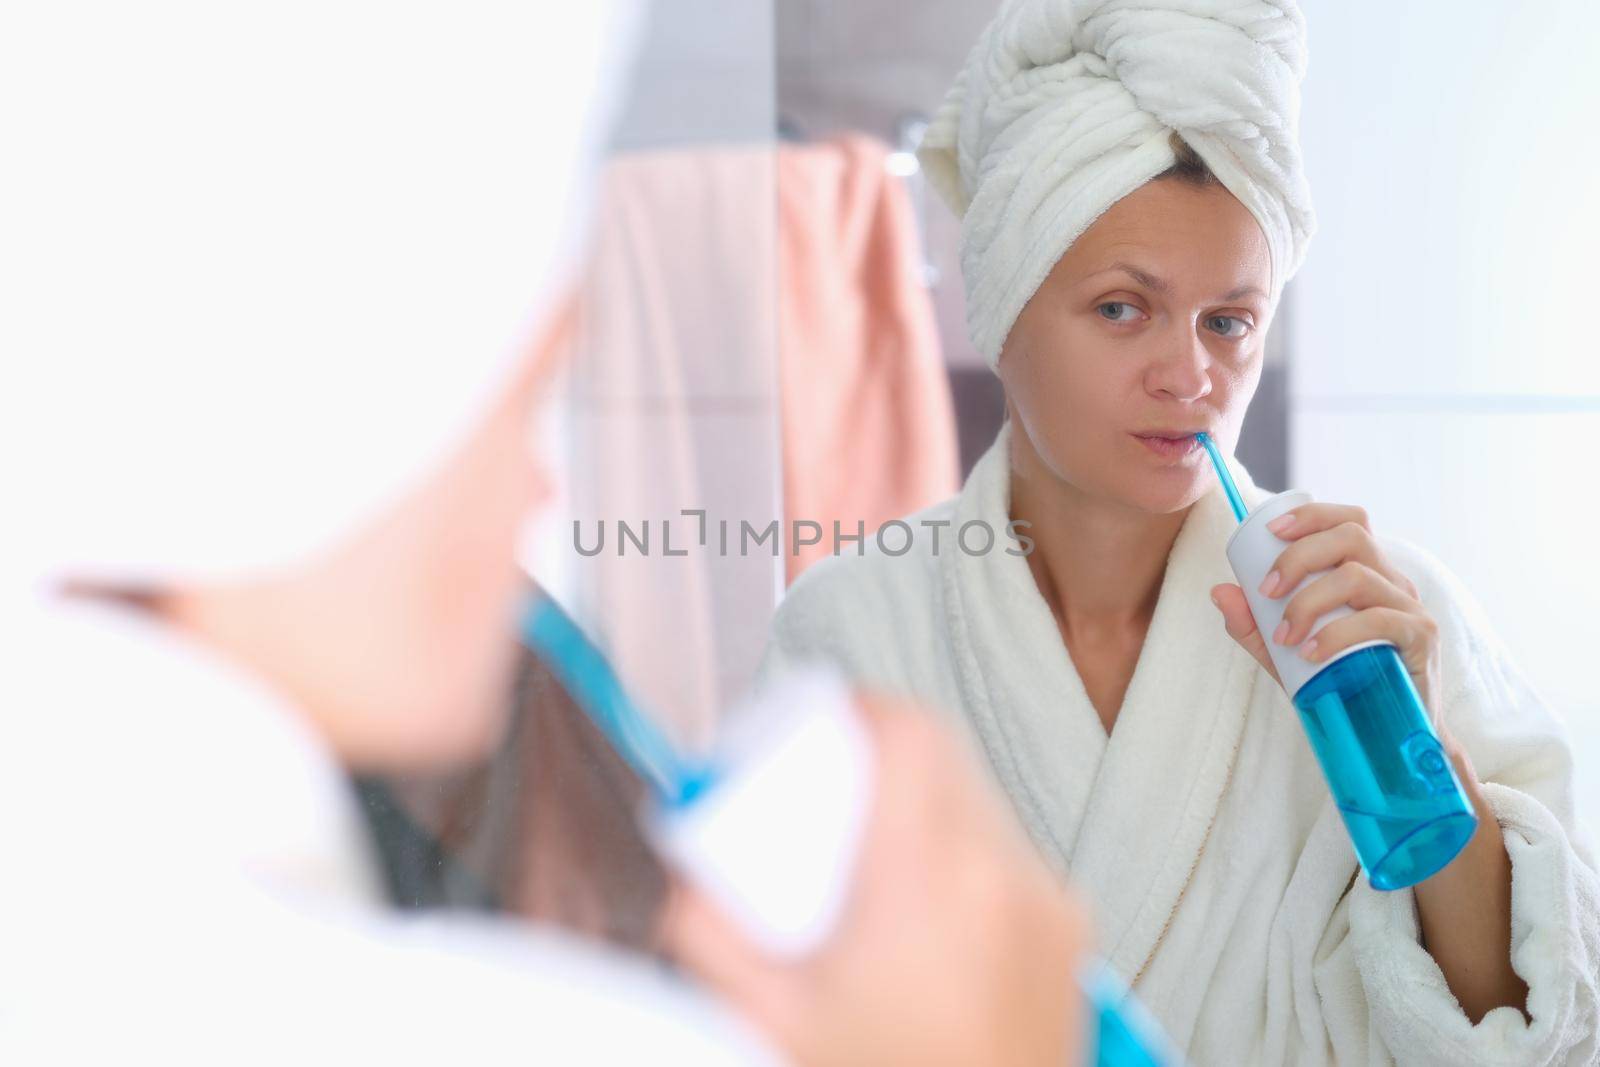 A woman in a dressing gown with a towel on her head is brushing her teeth with an irrigator. Oral hygiene, beauty and health